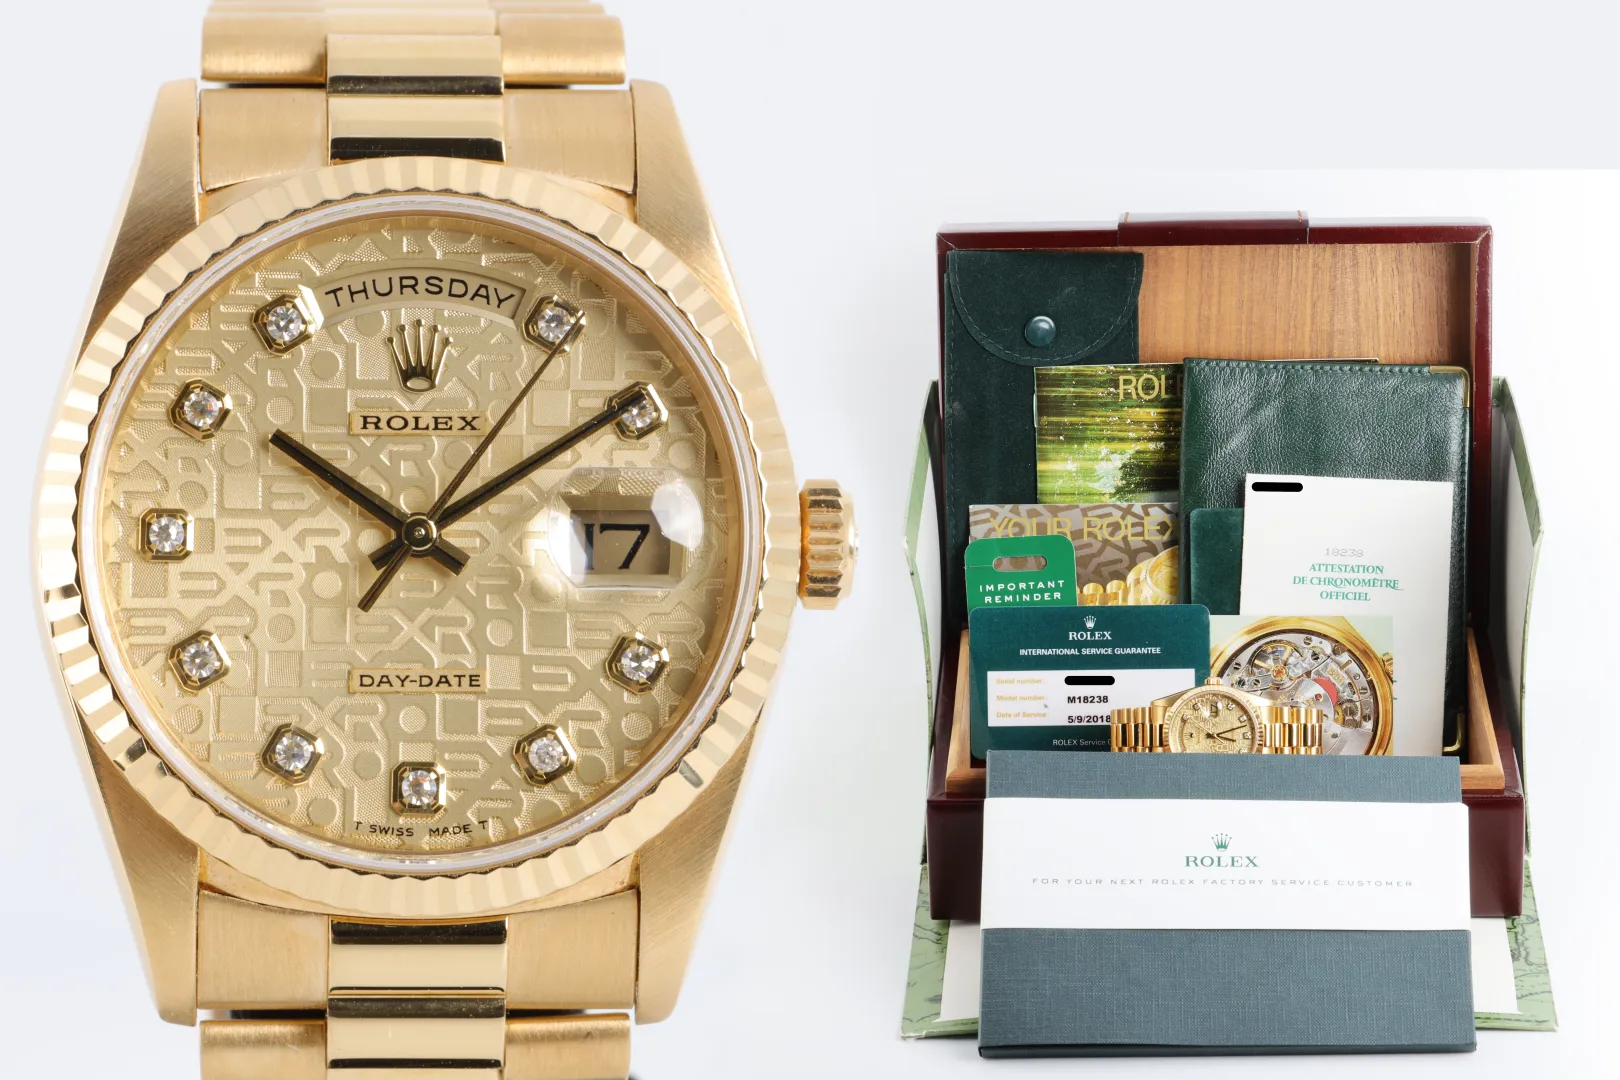 Rolex Day-Date 18238 nullmm Yellow gold